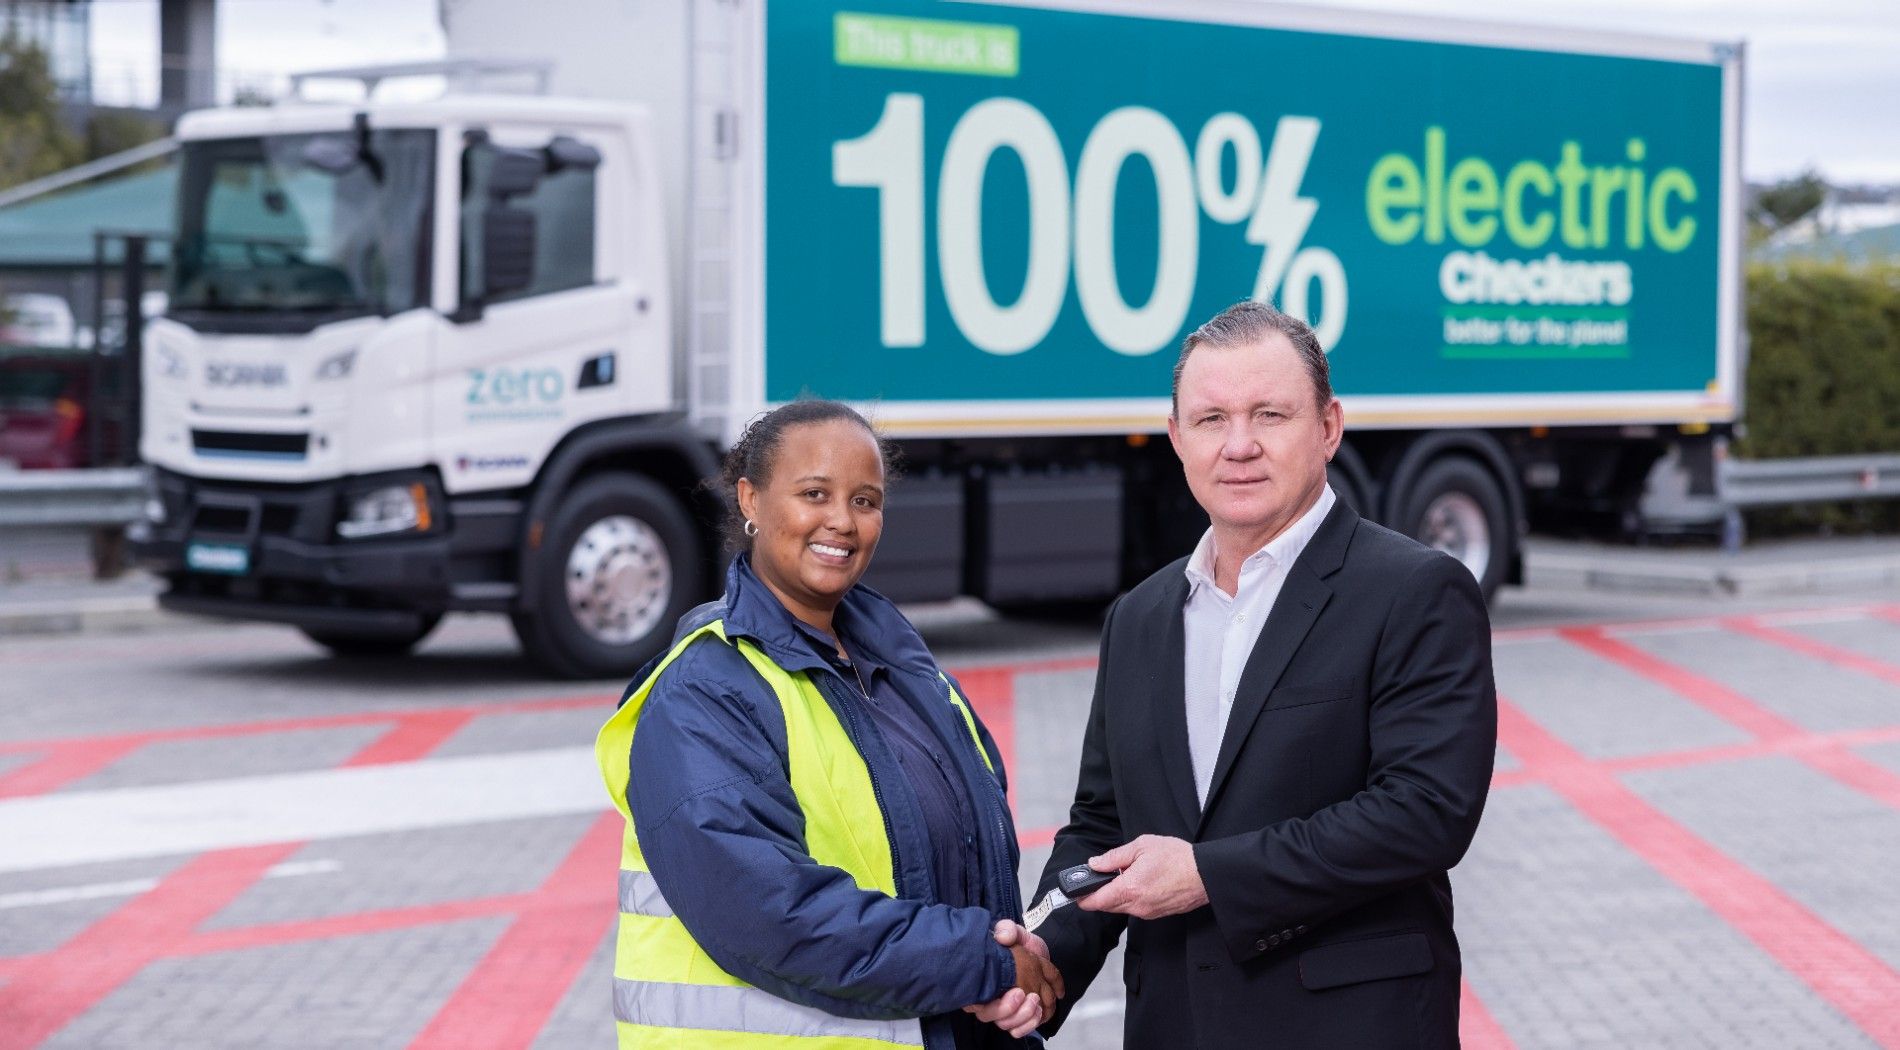 This South African retailer is going green with deliveries